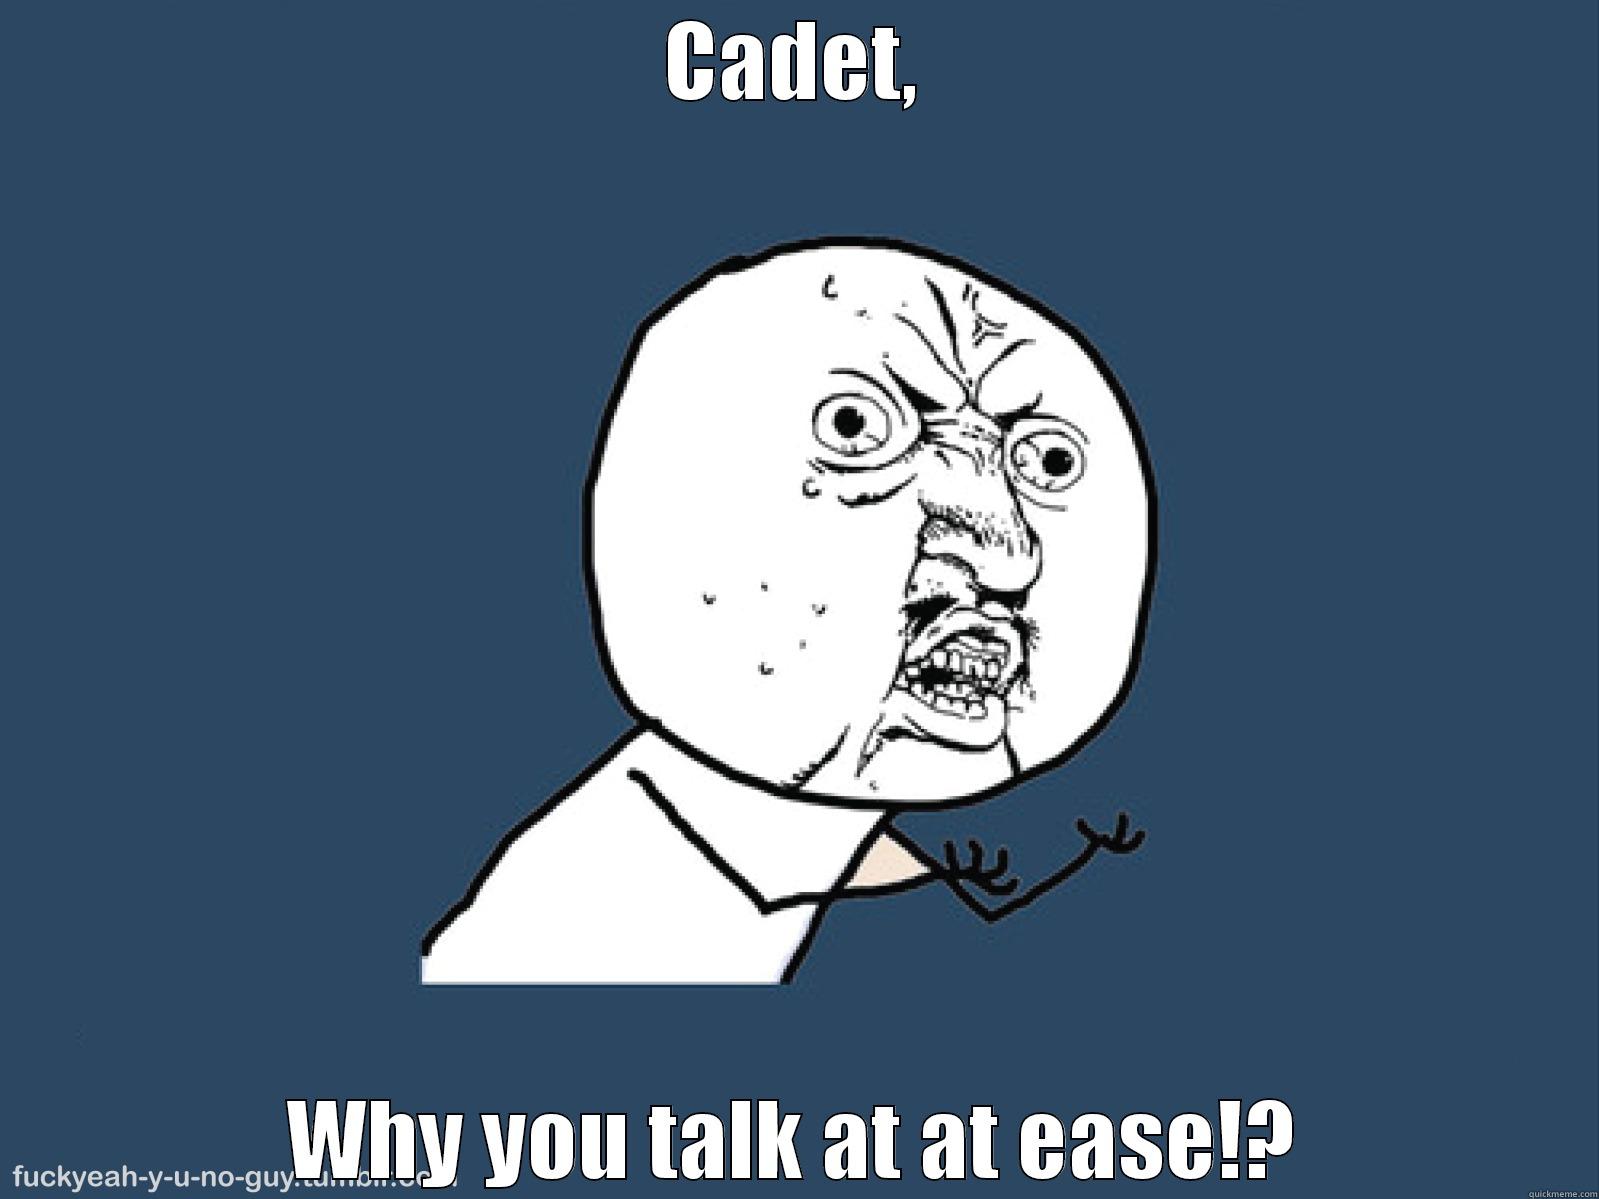 CADET, WHY YOU TALK AT AT EASE!? Misc